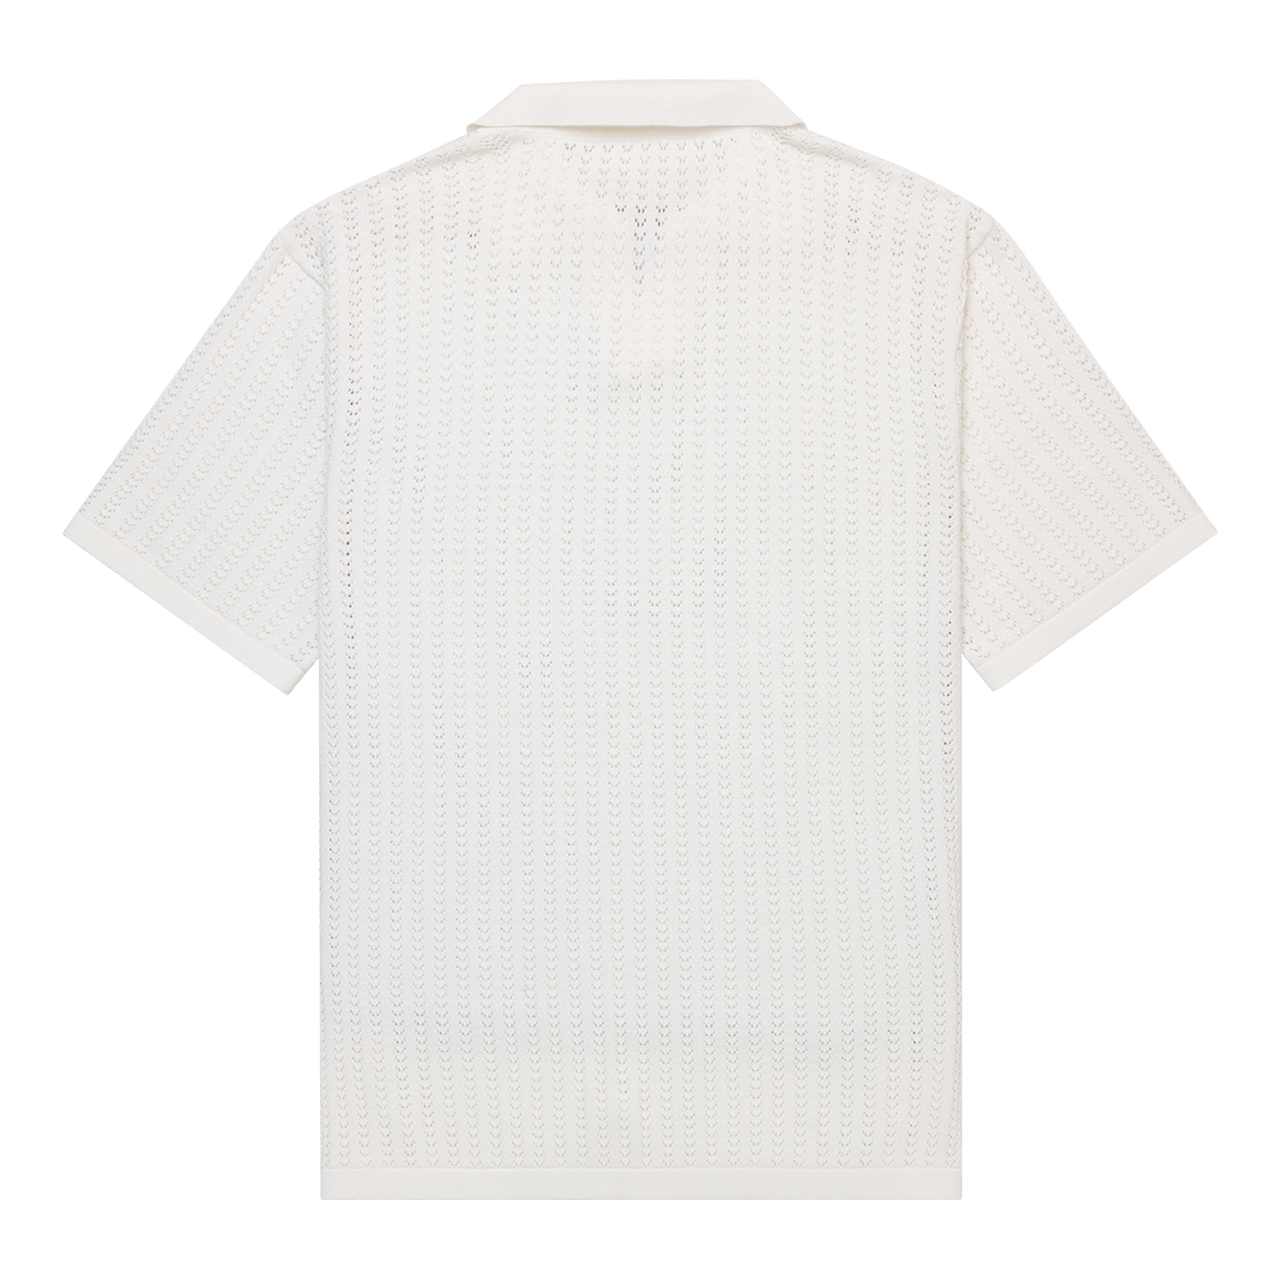 Copacetic Polo Knit White